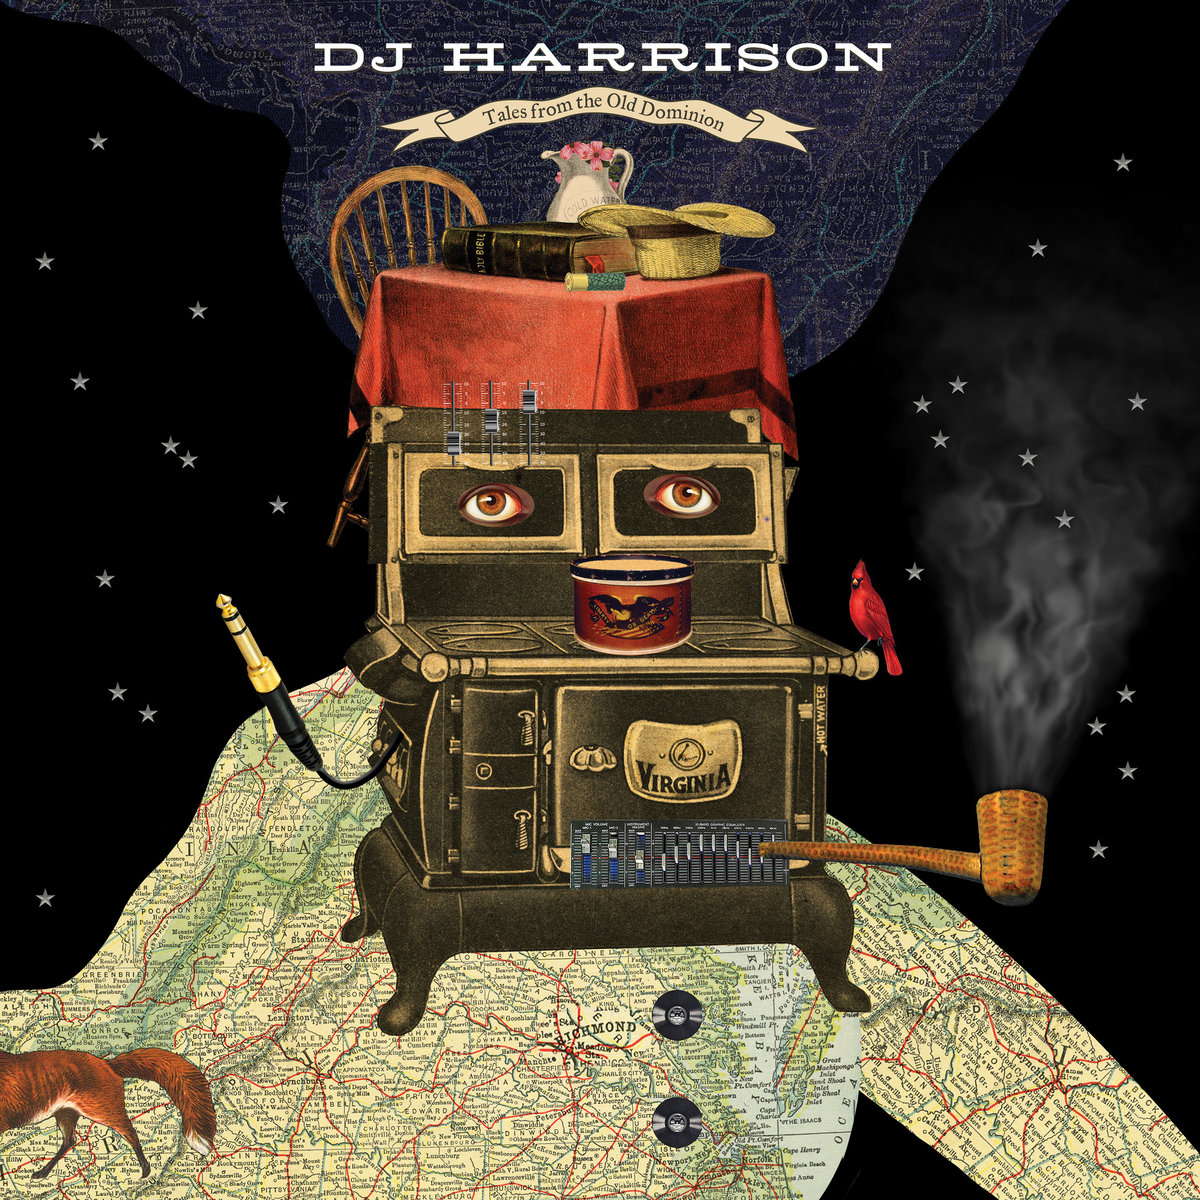 Tales_from_the_old_dominion_dj_harrison